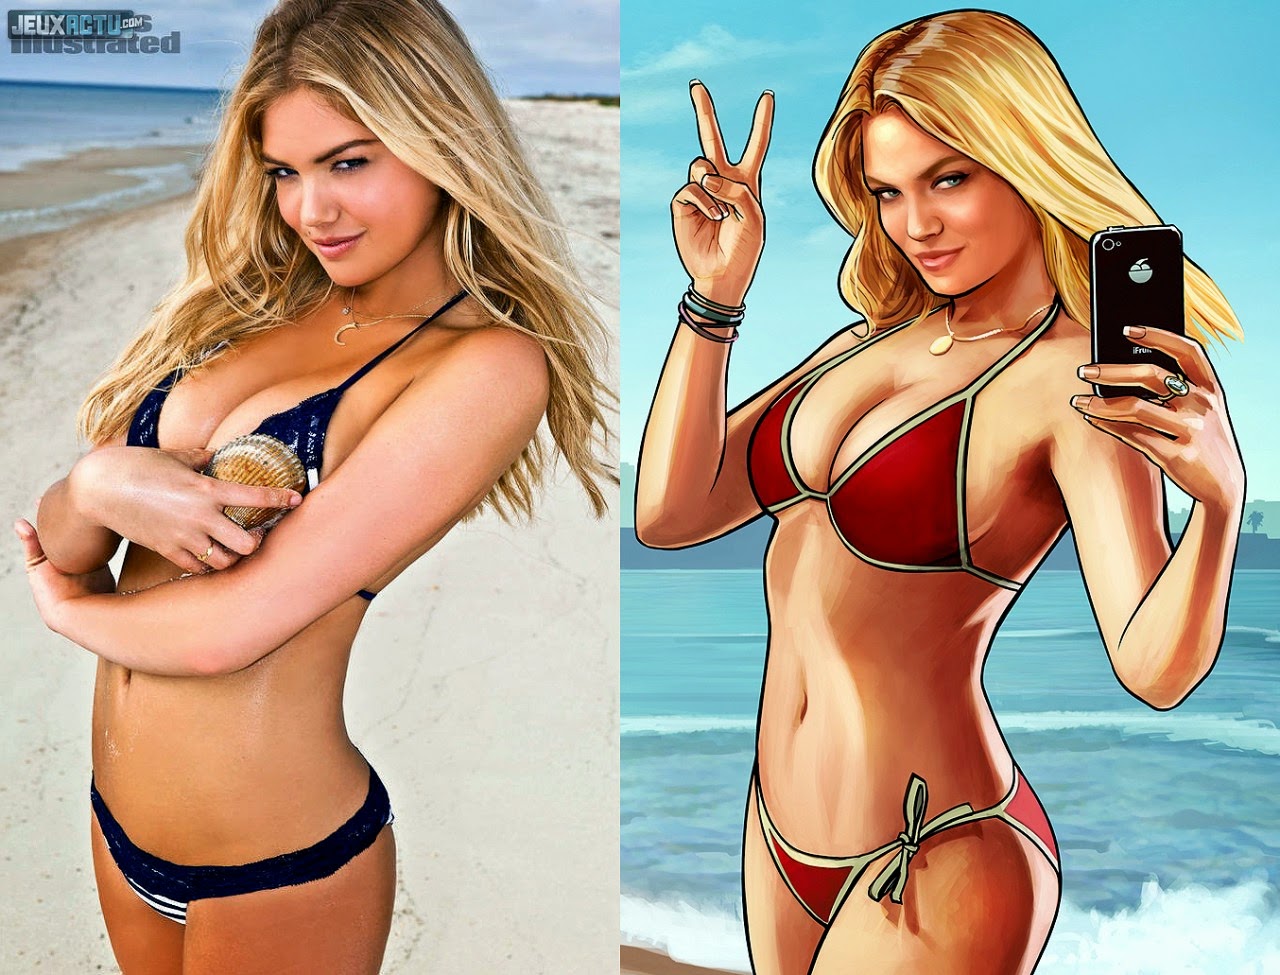 Gta5 how to find naked woman cartoon videos